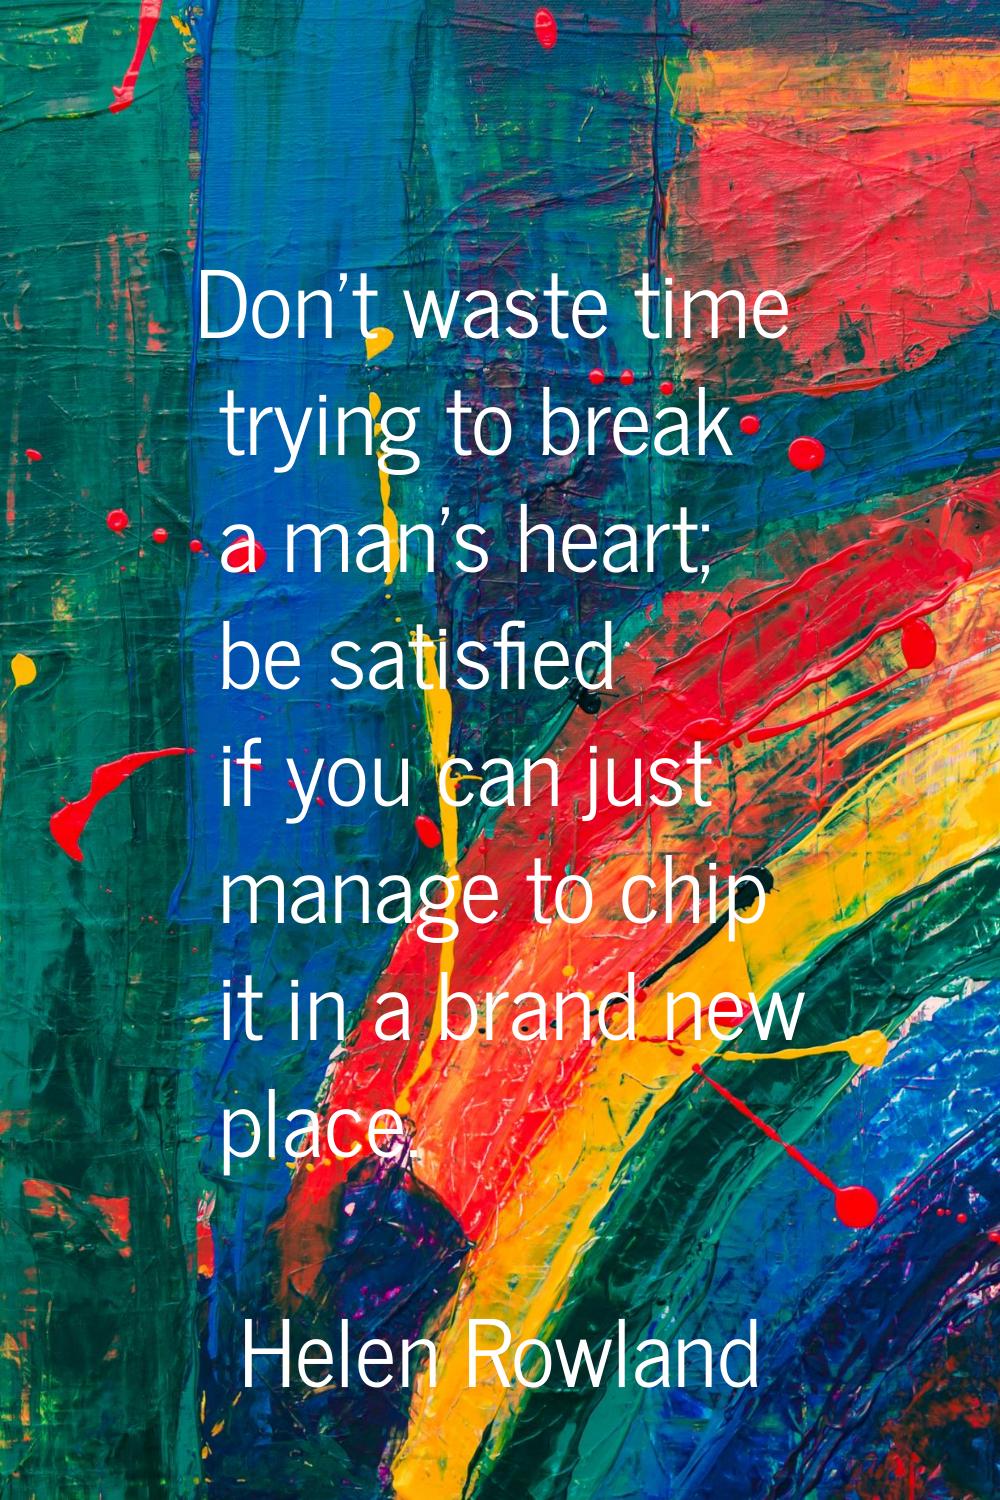 Don't waste time trying to break a man's heart; be satisfied if you can just manage to chip it in a